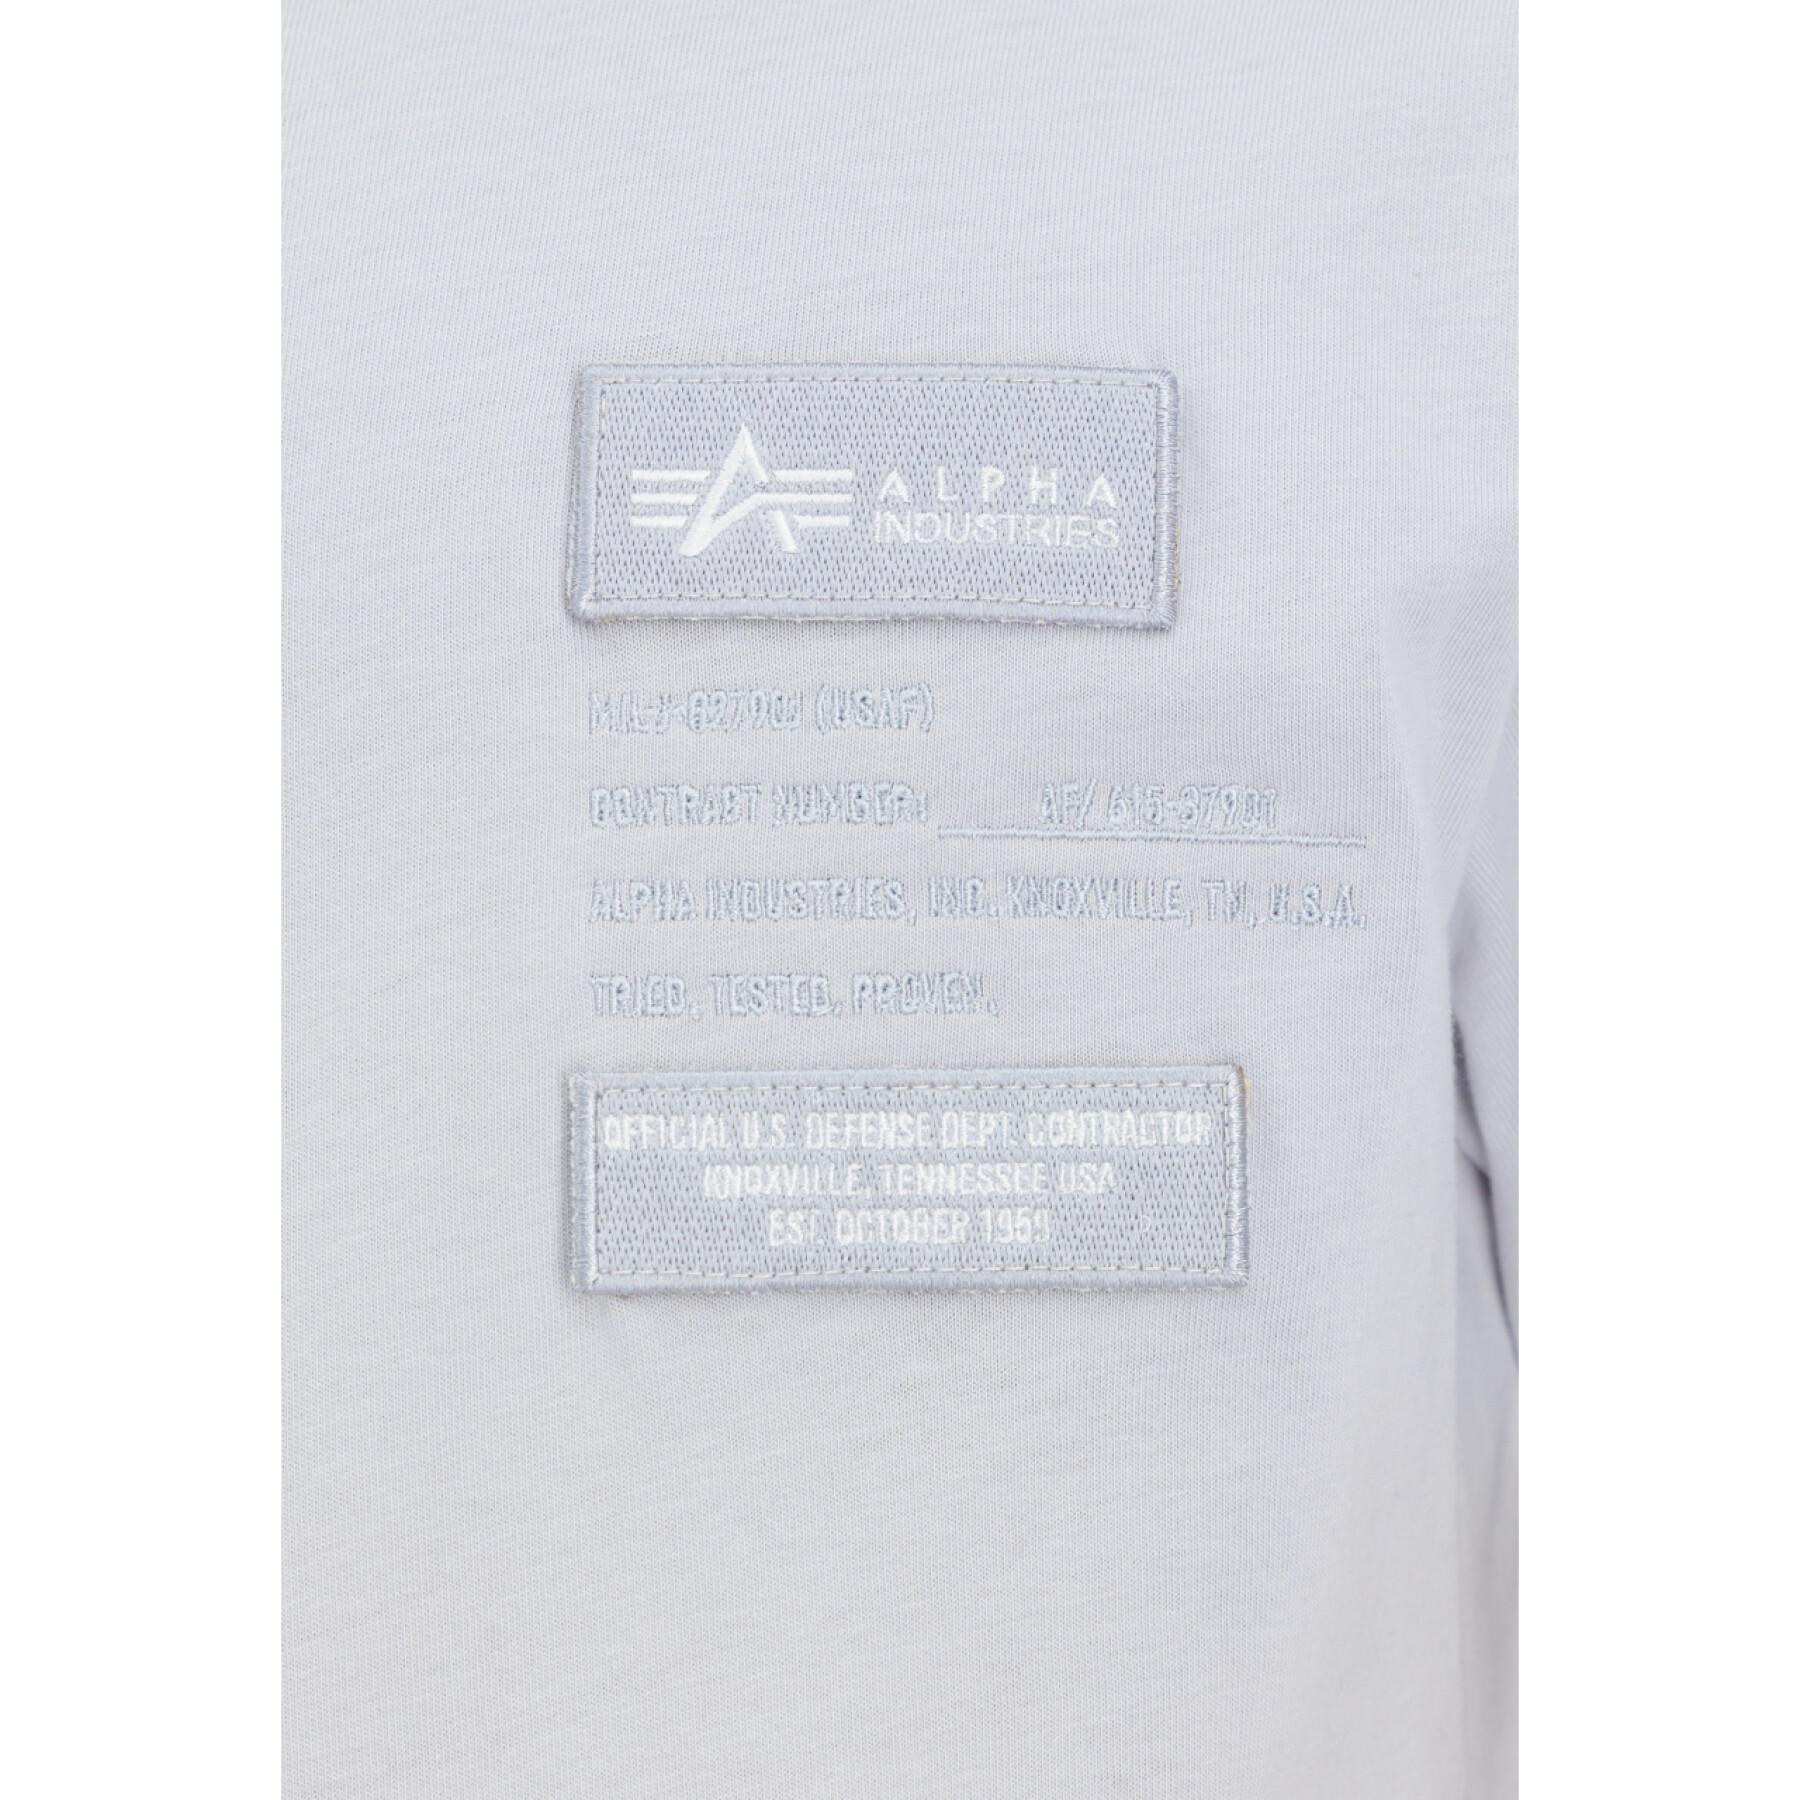 T-shirt Alpha Industries Patch and - T-shirts - Polo shirts - LF Lifestyle Man